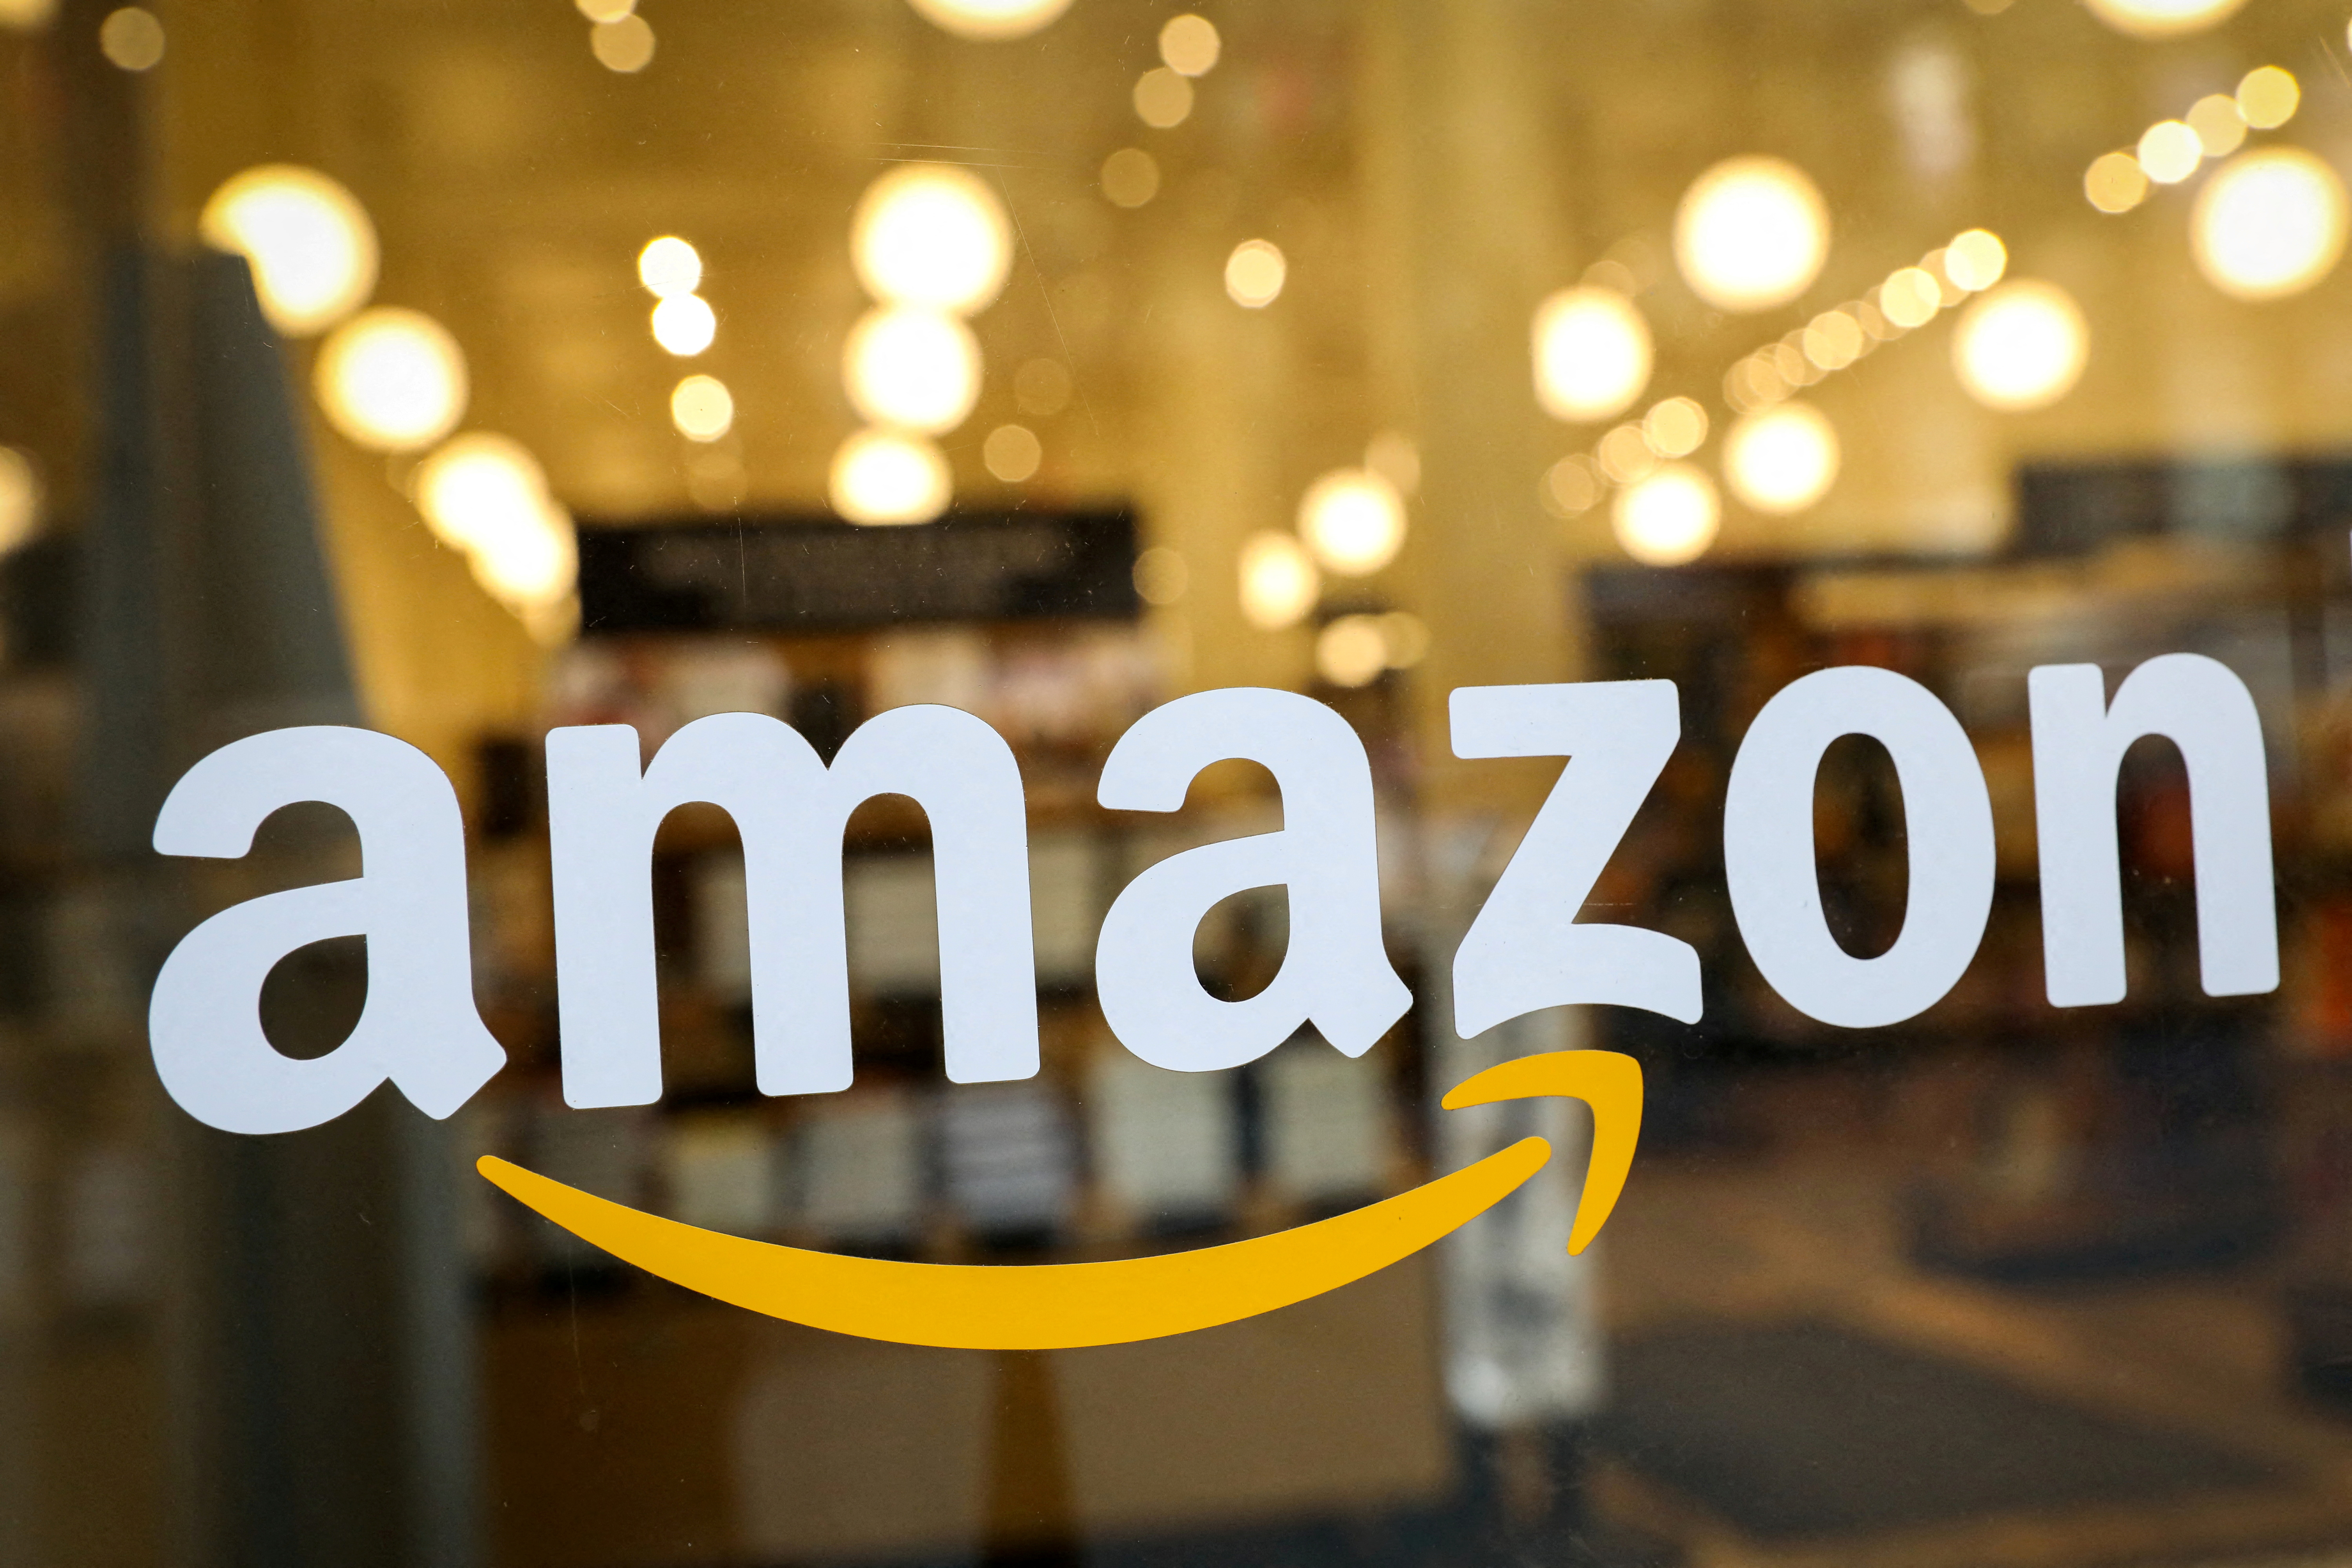 The logo of Amazon is seen on the door of an Amazon Books retail store in New York